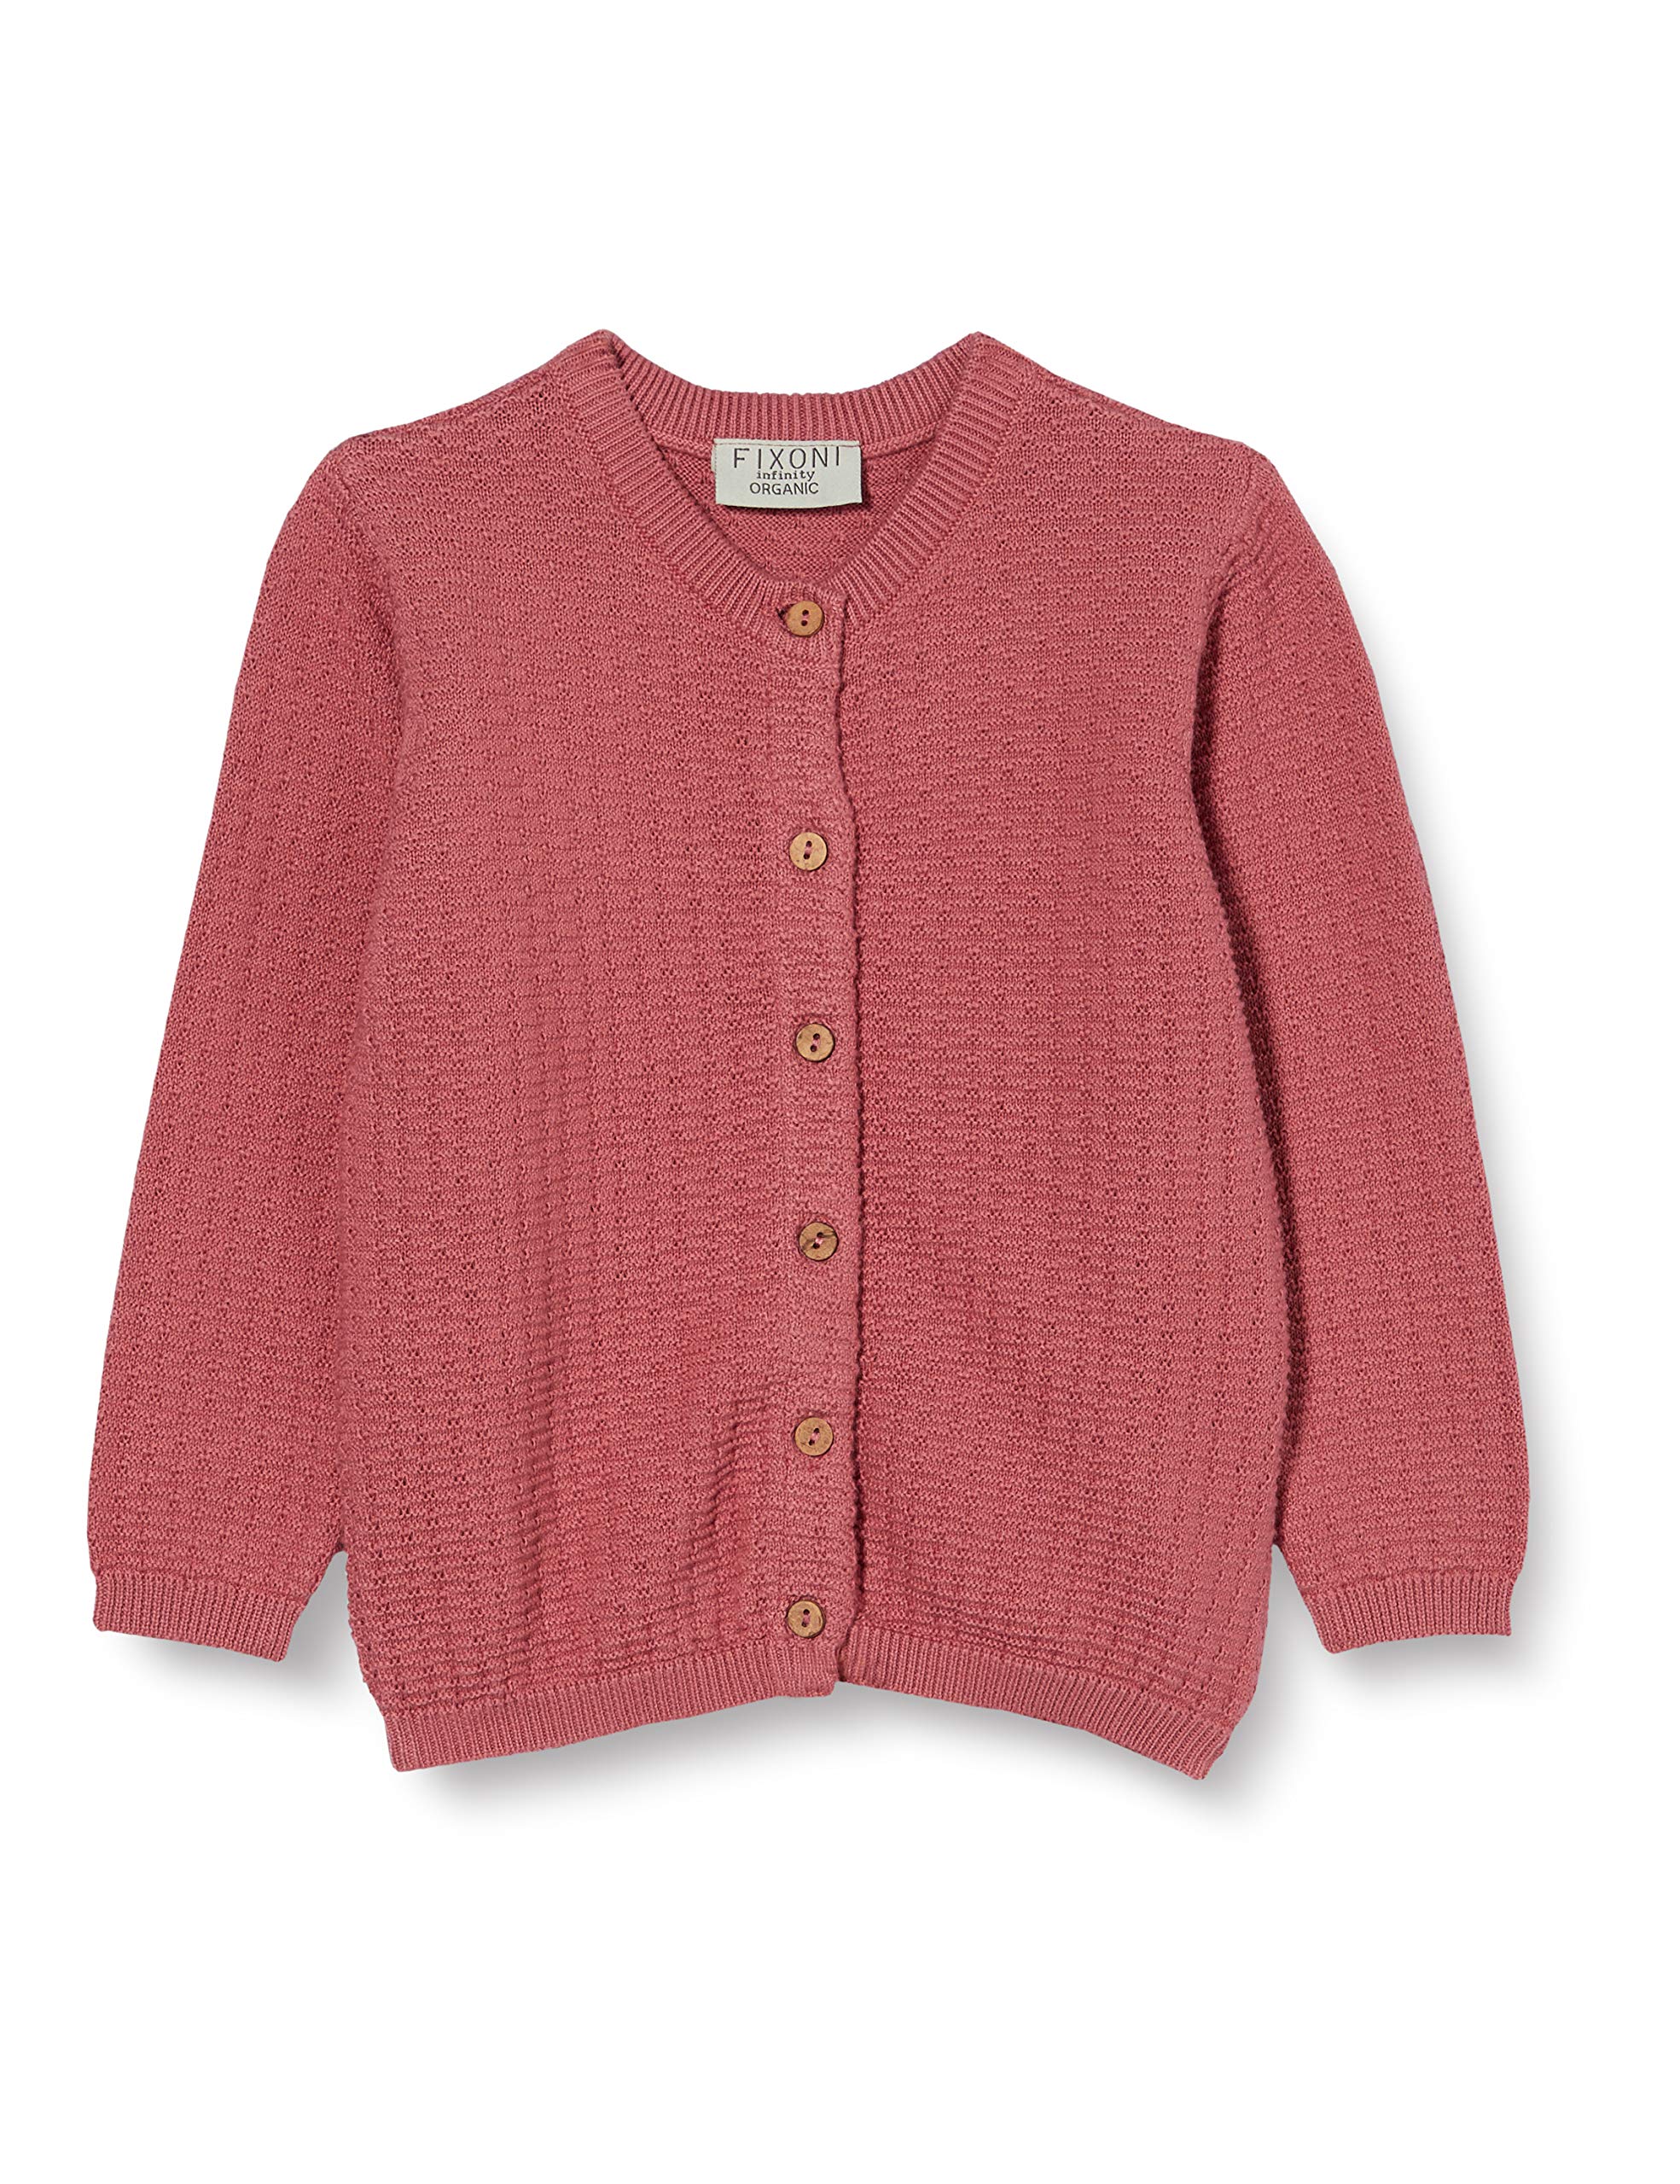 FIXONI Baby-Mädchen Knitted Cardigan Bluse, Dusty Rose, 74